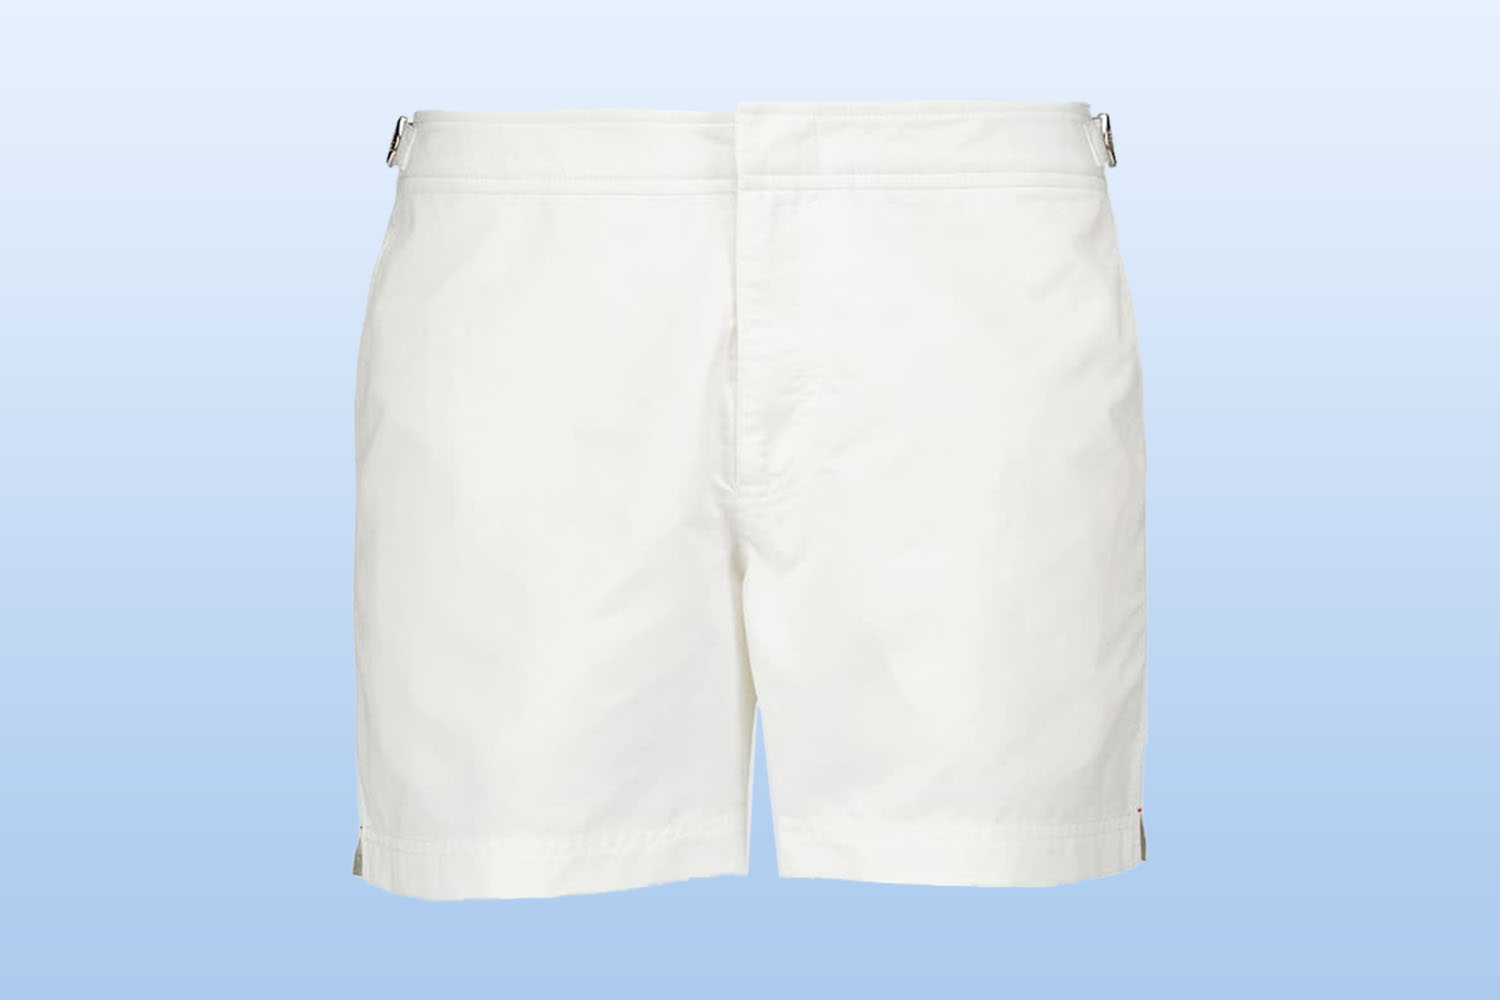 a a pair of white swim trunks from mytheresa on a light blue background